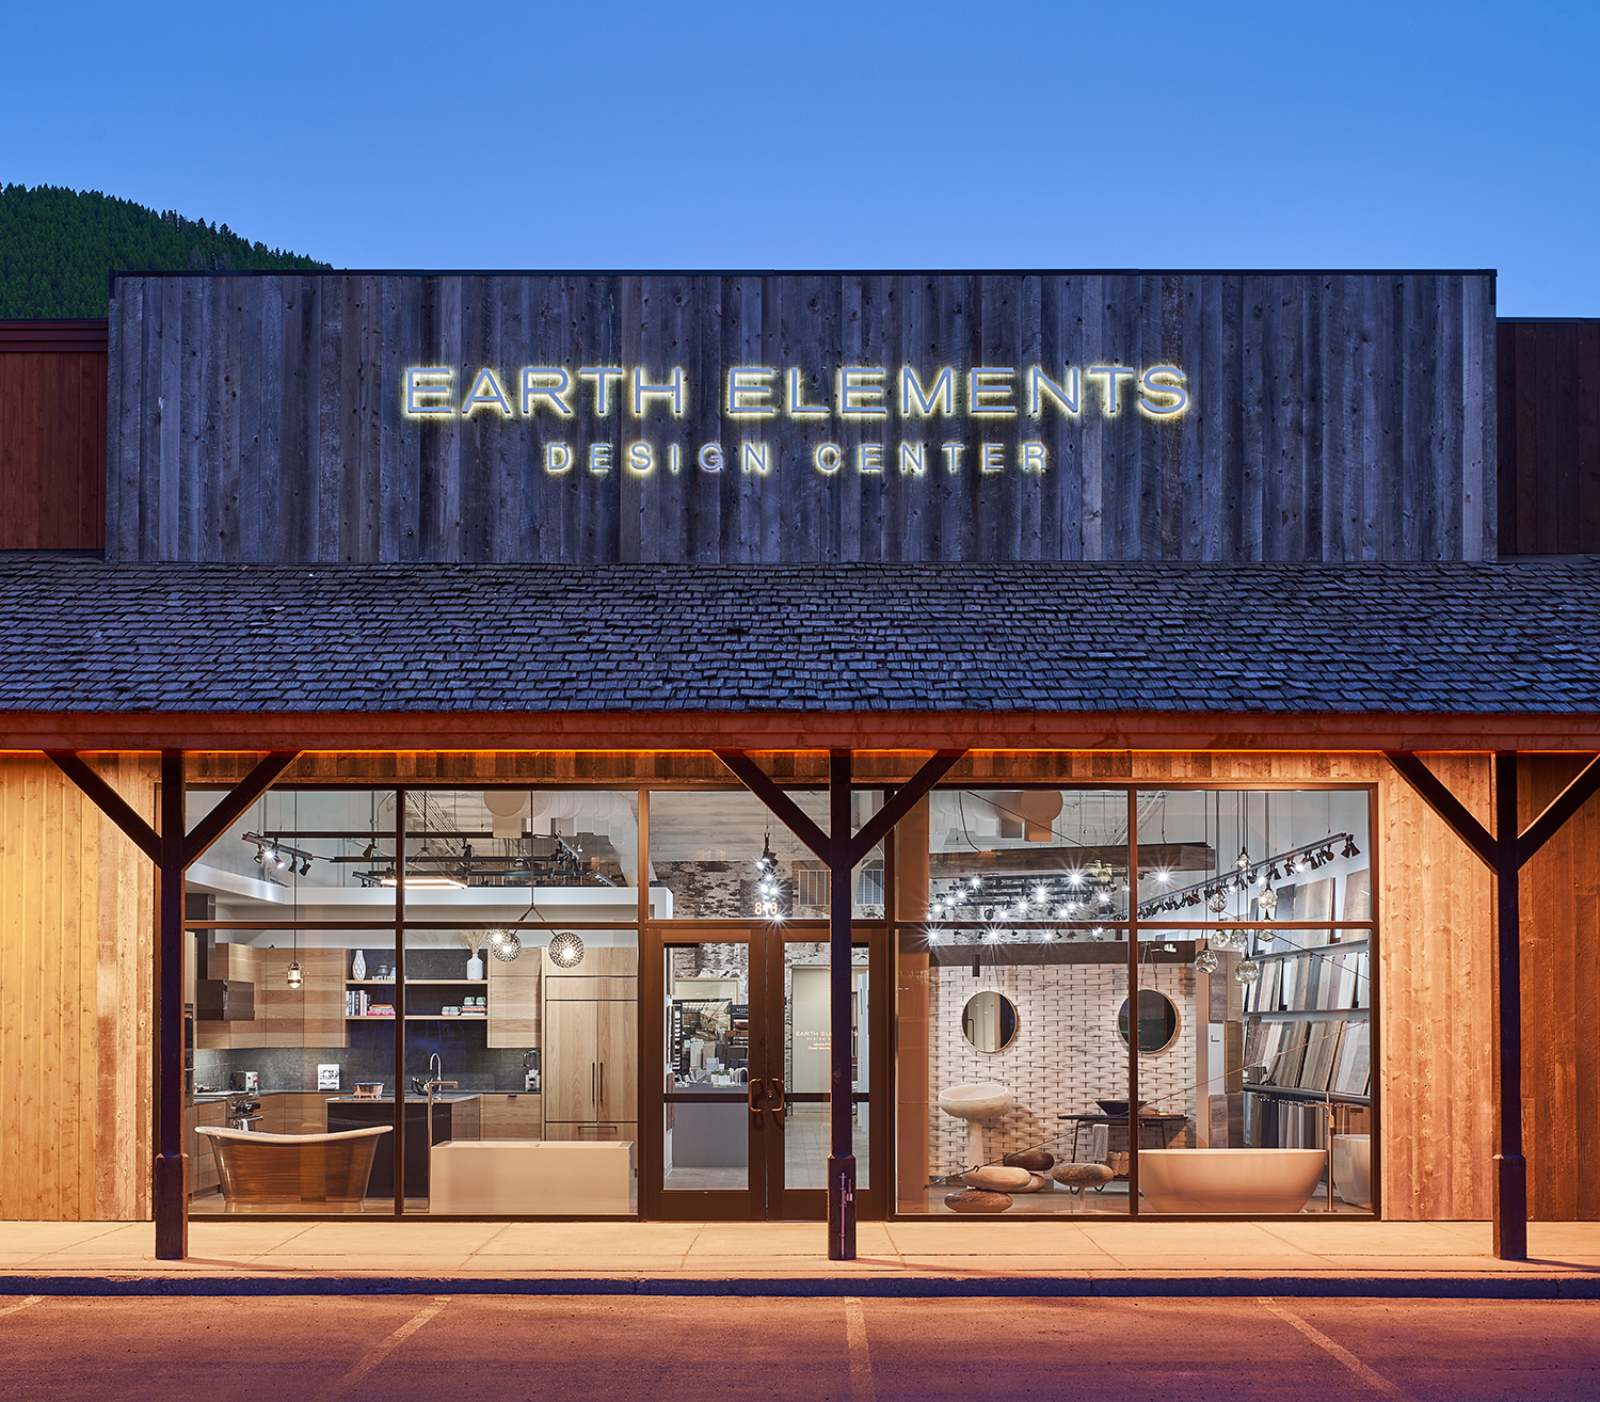 Exterior view of the front of Earth Elements Design Center, a custom retail space designed by Farmer Payne Architects.